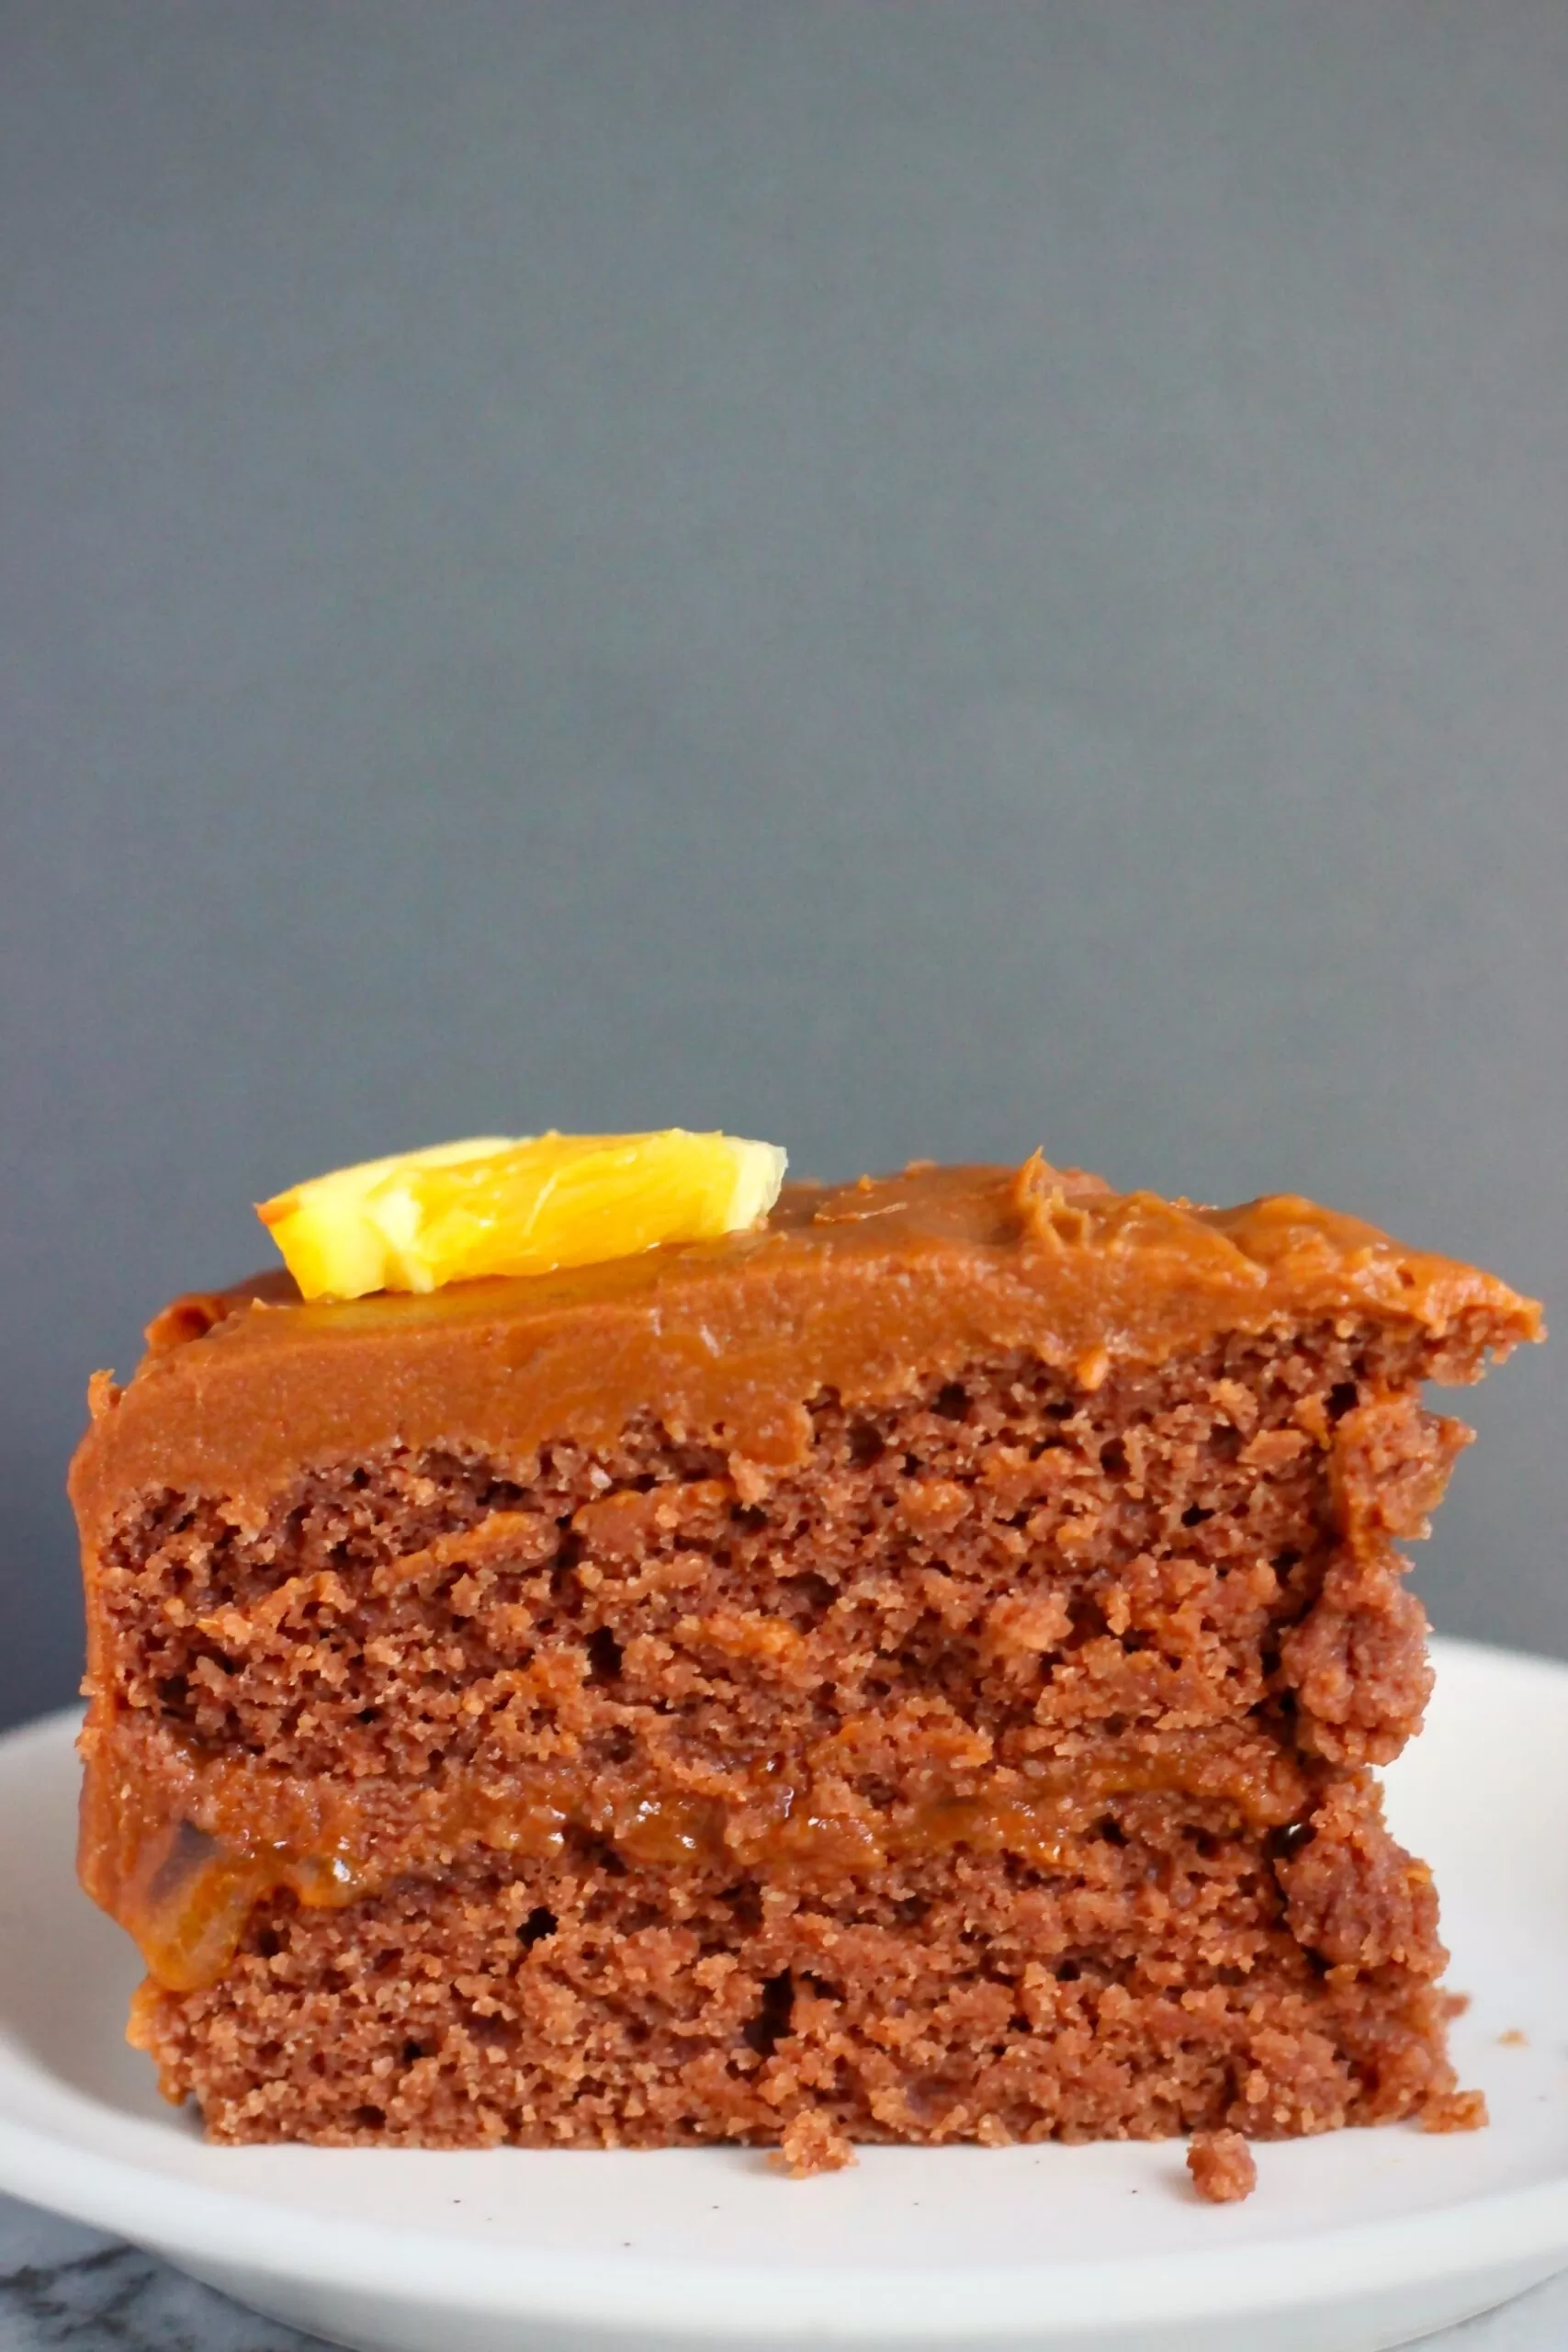 A slice of chocolate sponge sandwiched with chocolate frosting topped with a slice of orange against a dark grey background